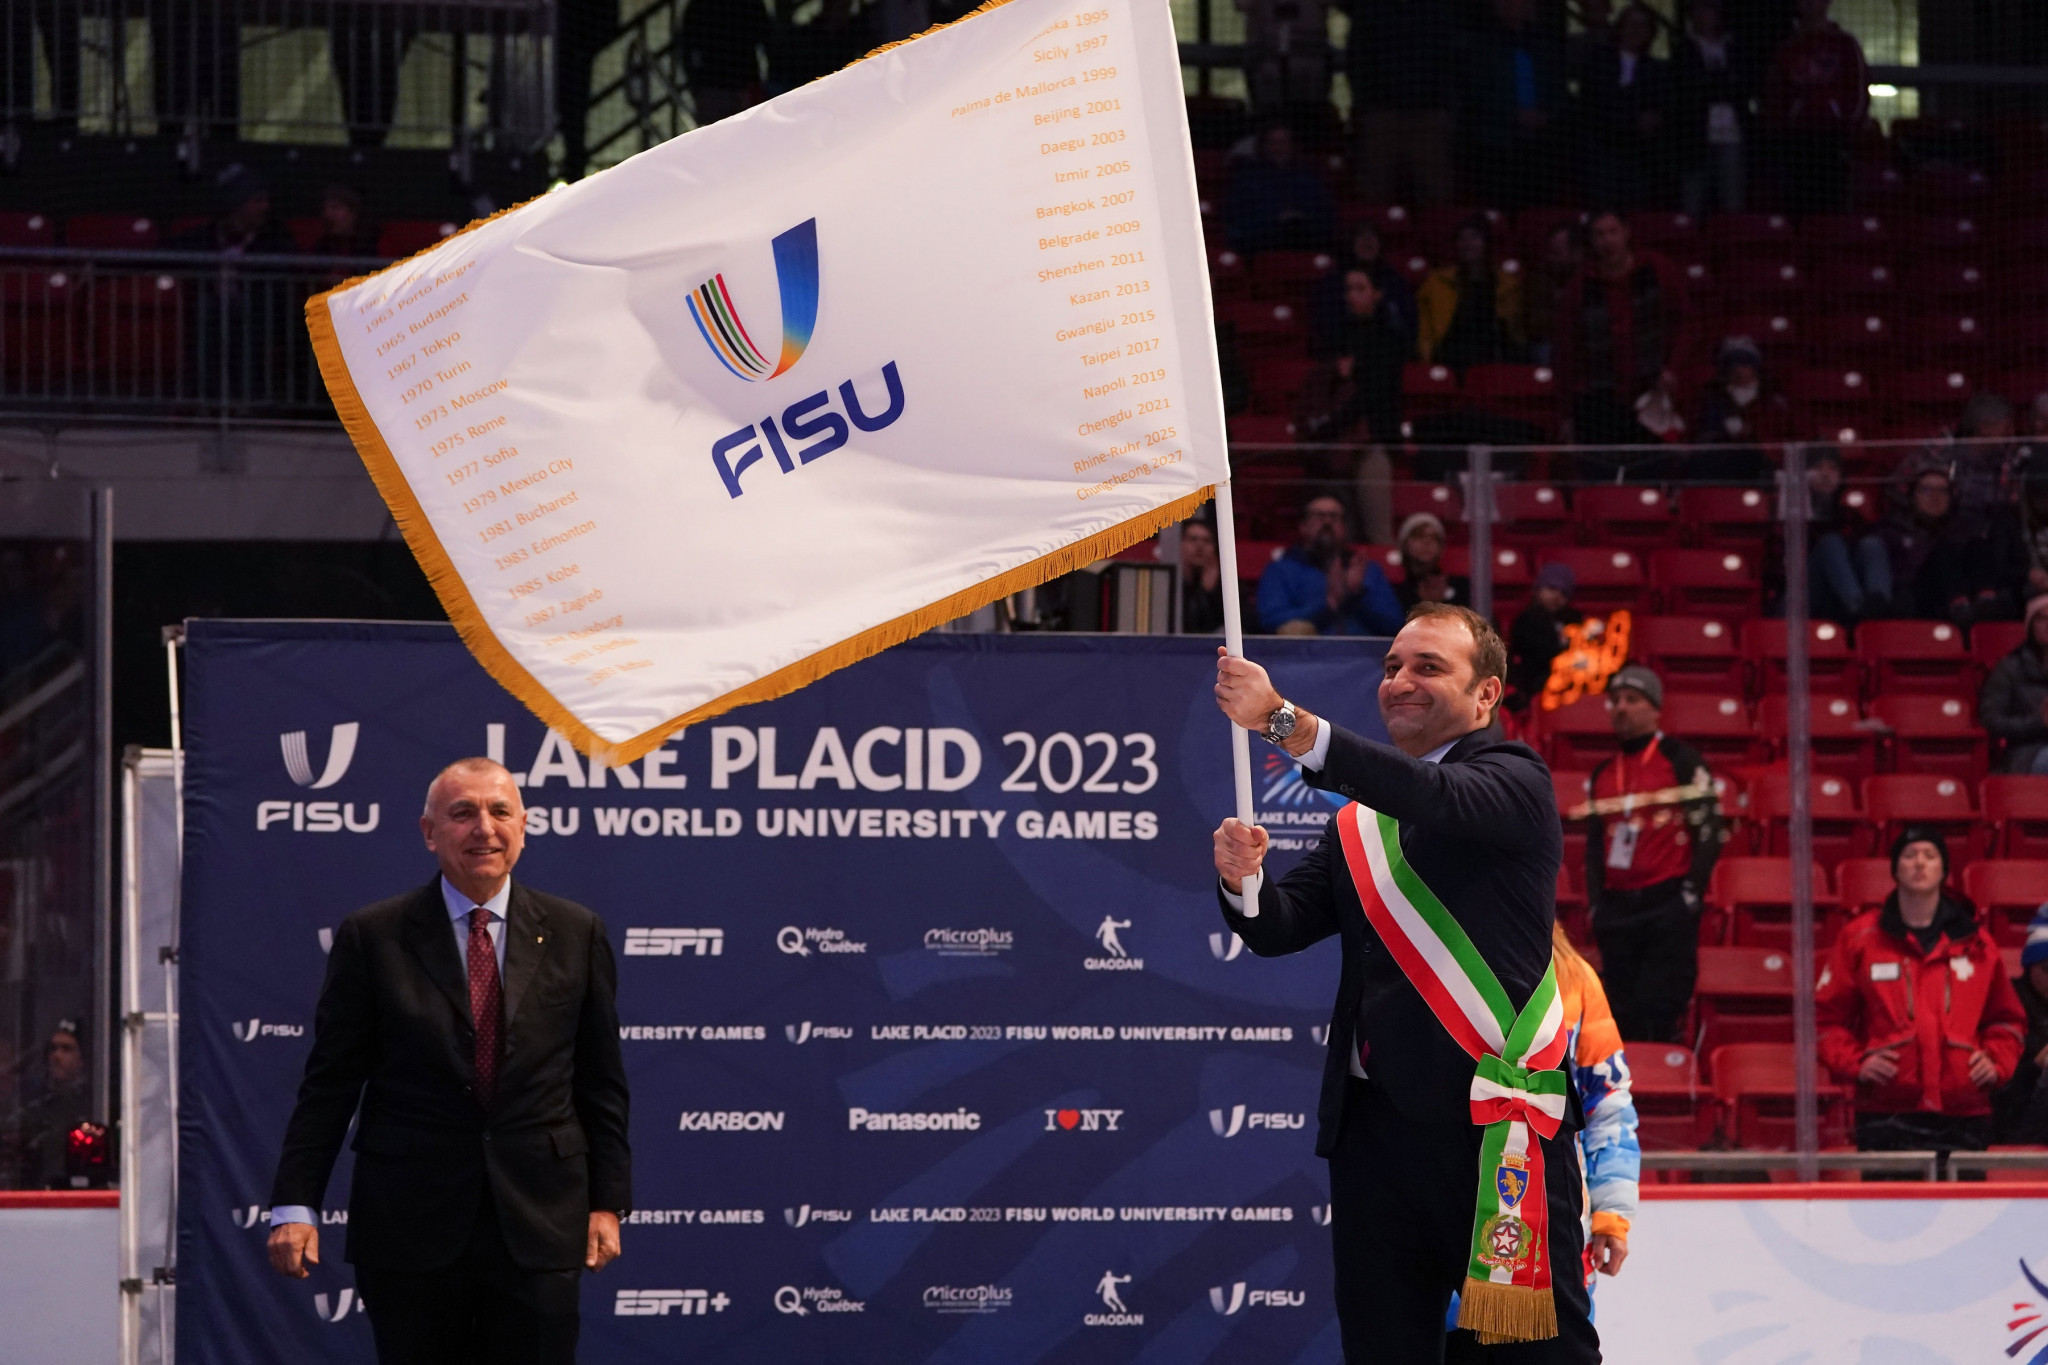 Turin is the next host of the winter FISU Games after the 2023 edition took place in Lake Placid in January ©FISU